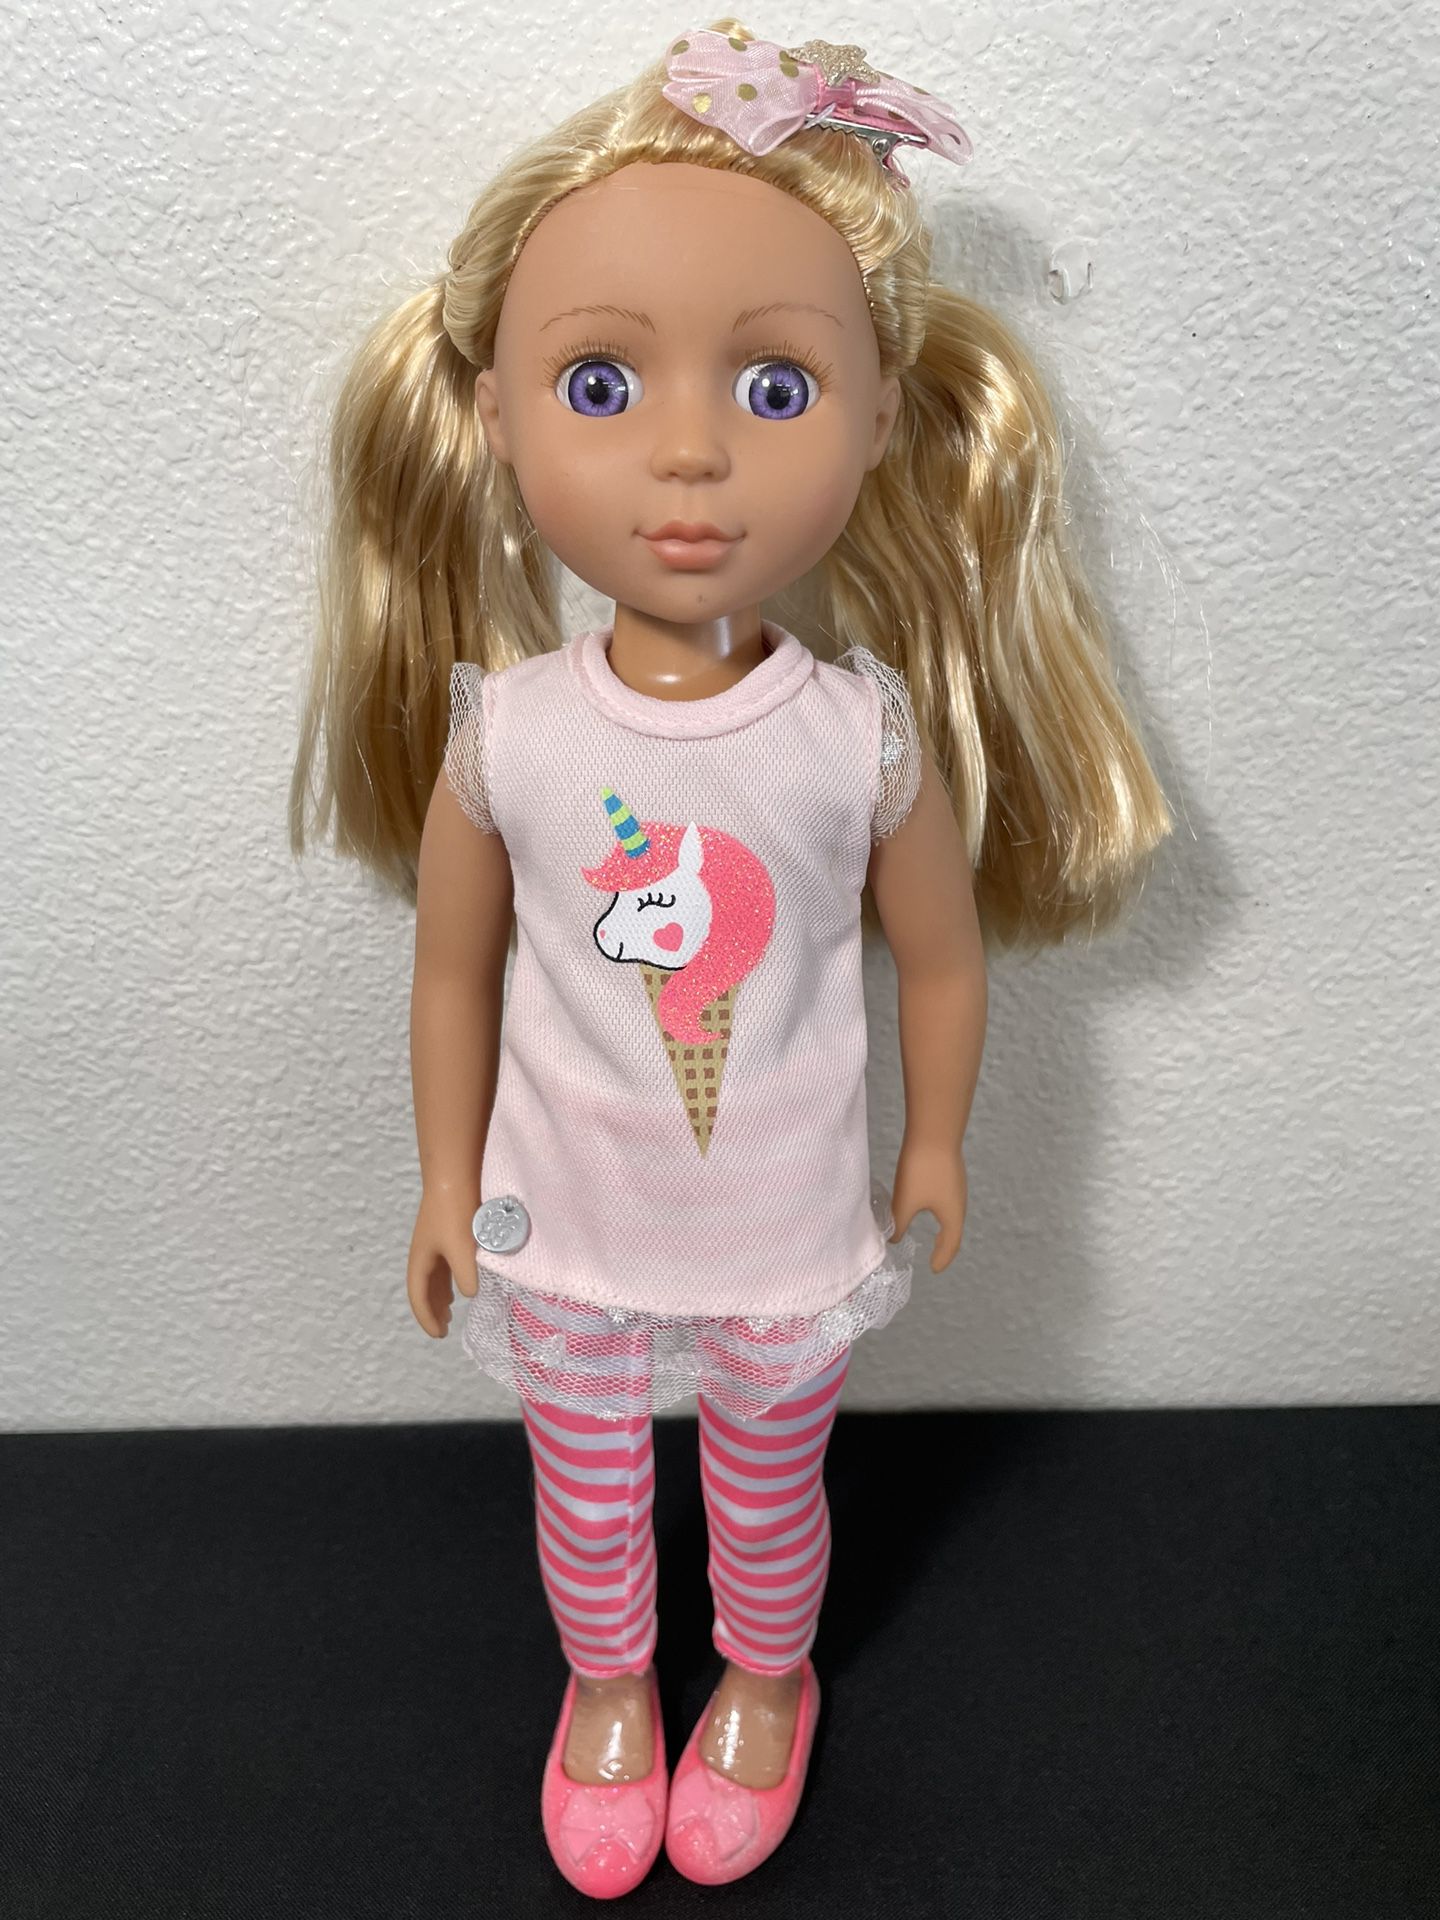 Glitter Girls Lacy 14 Inch Doll Wearing Pink Tunic, Striped Leggings, Hair Bow